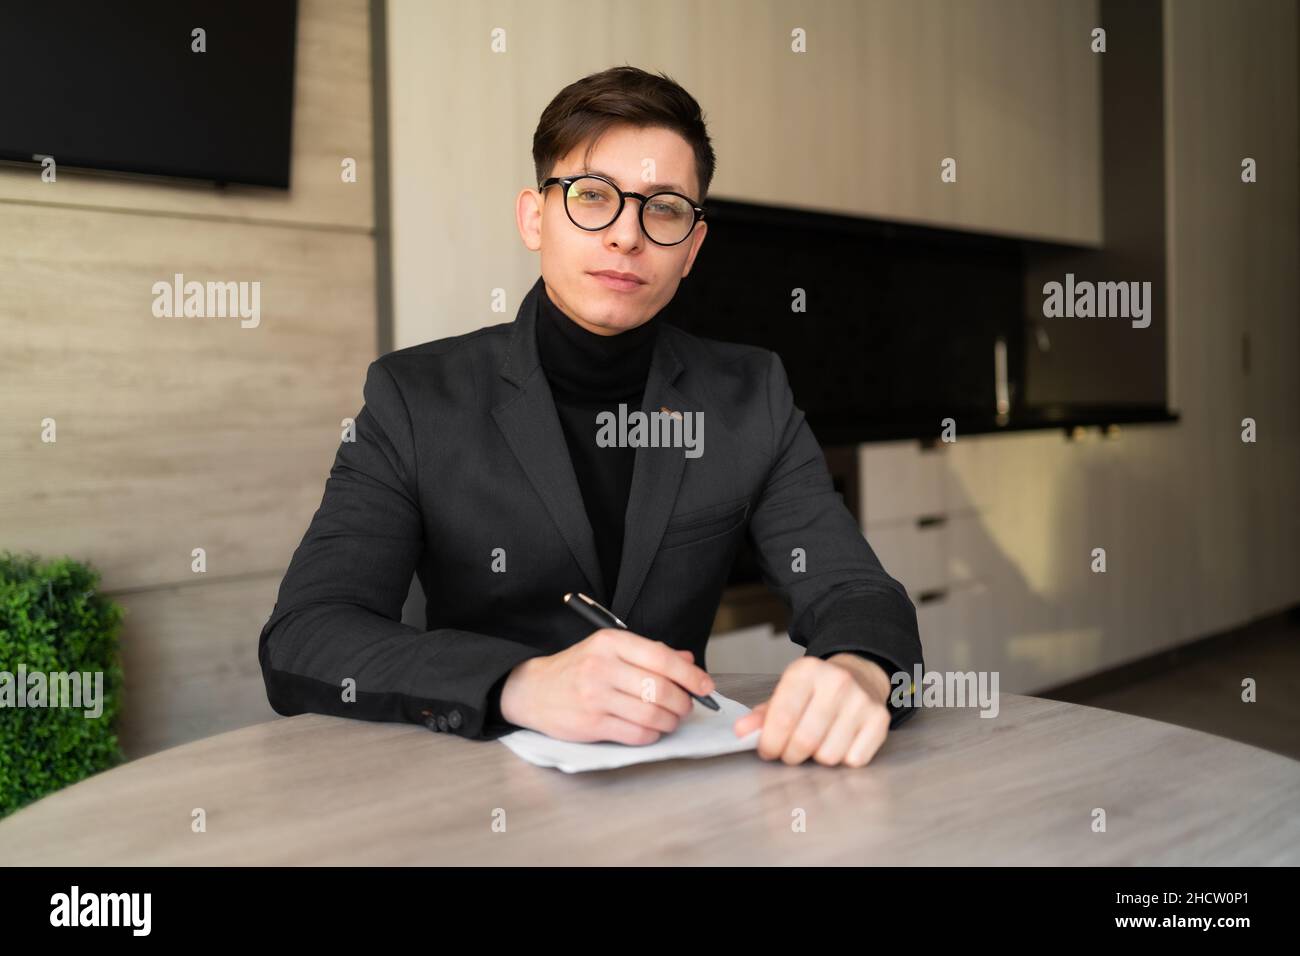 male studying at home online, adult student recording lecture, home schooling concept Stock Photo